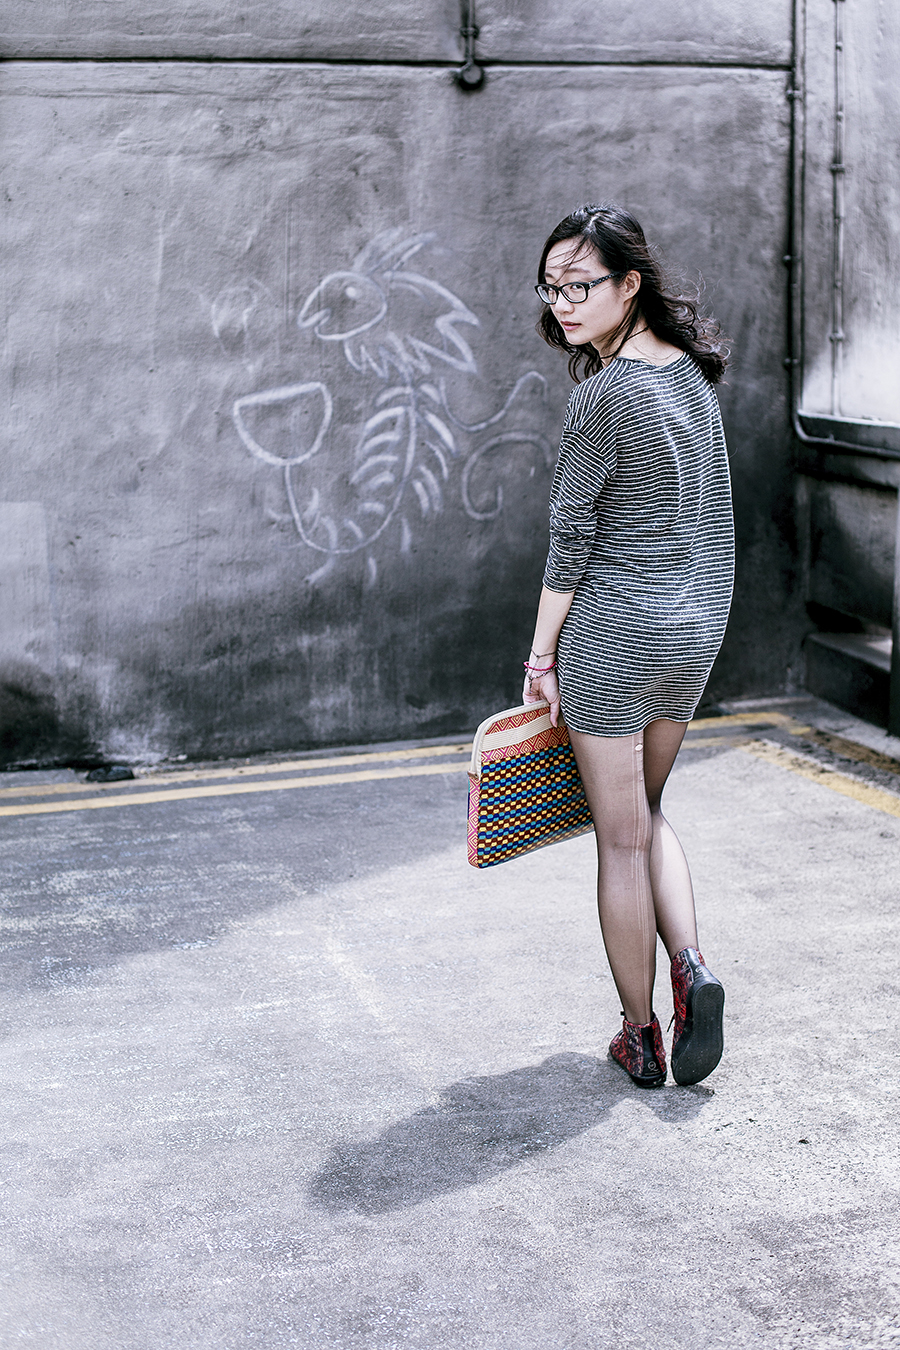 Zara striped tunic, DKNY sheer tights, The Little Fox necklace from Etsy, Fossil tribal design laptop sleeve, Gap black frame glasses, Alexander McQueen x Puma high top sneakers.